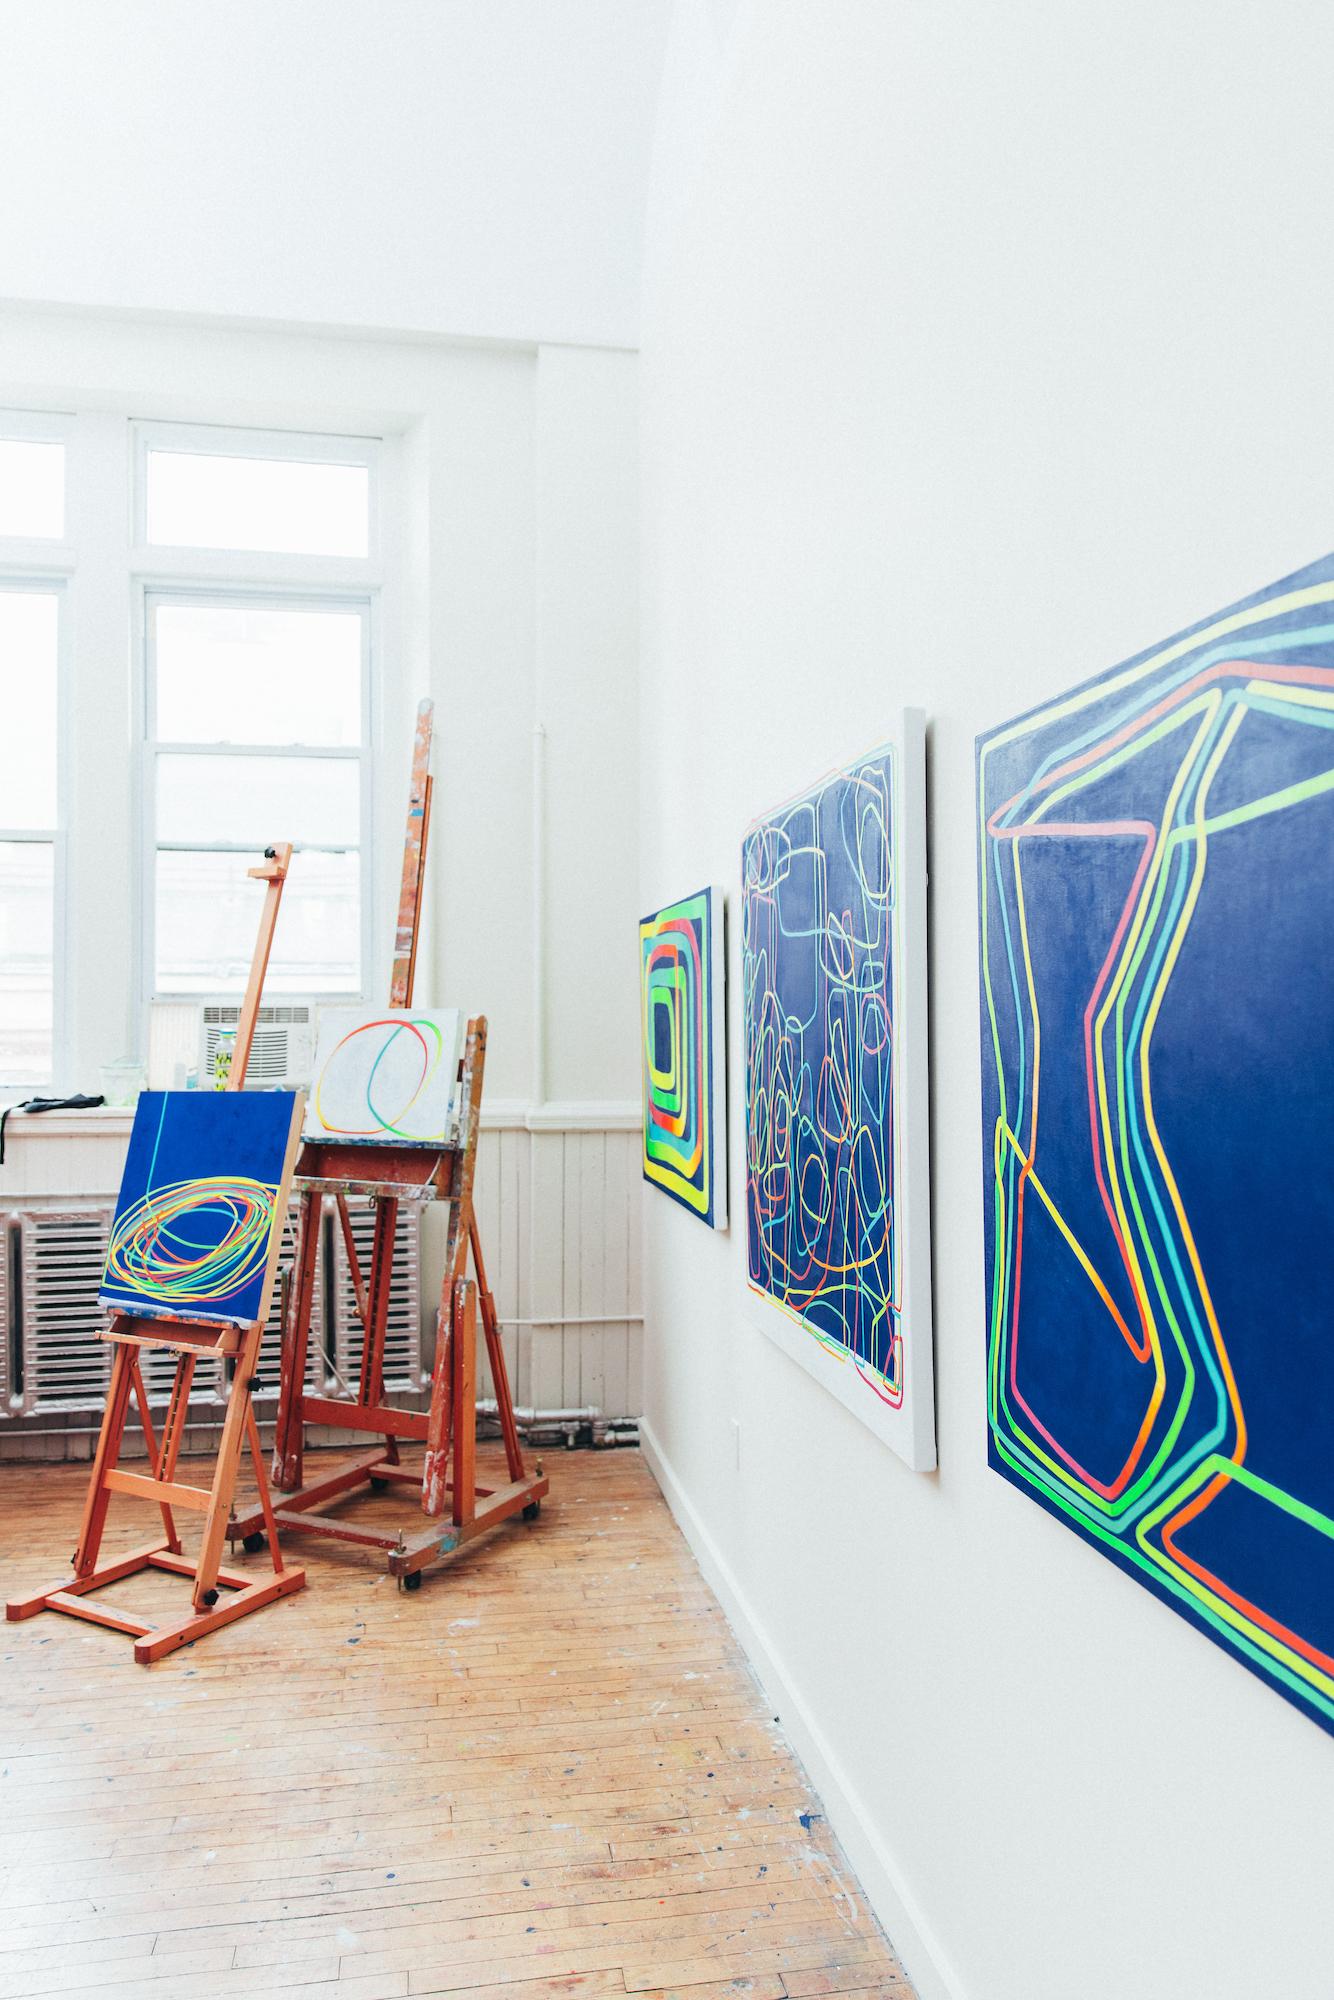 Paula Cahill's linear abstract compositions are often comprised of a single, luminous line that meanders, changes color, and seamlessly connects back to itself. This piece combines Cahill''s signature color-changing line on a deep blue background